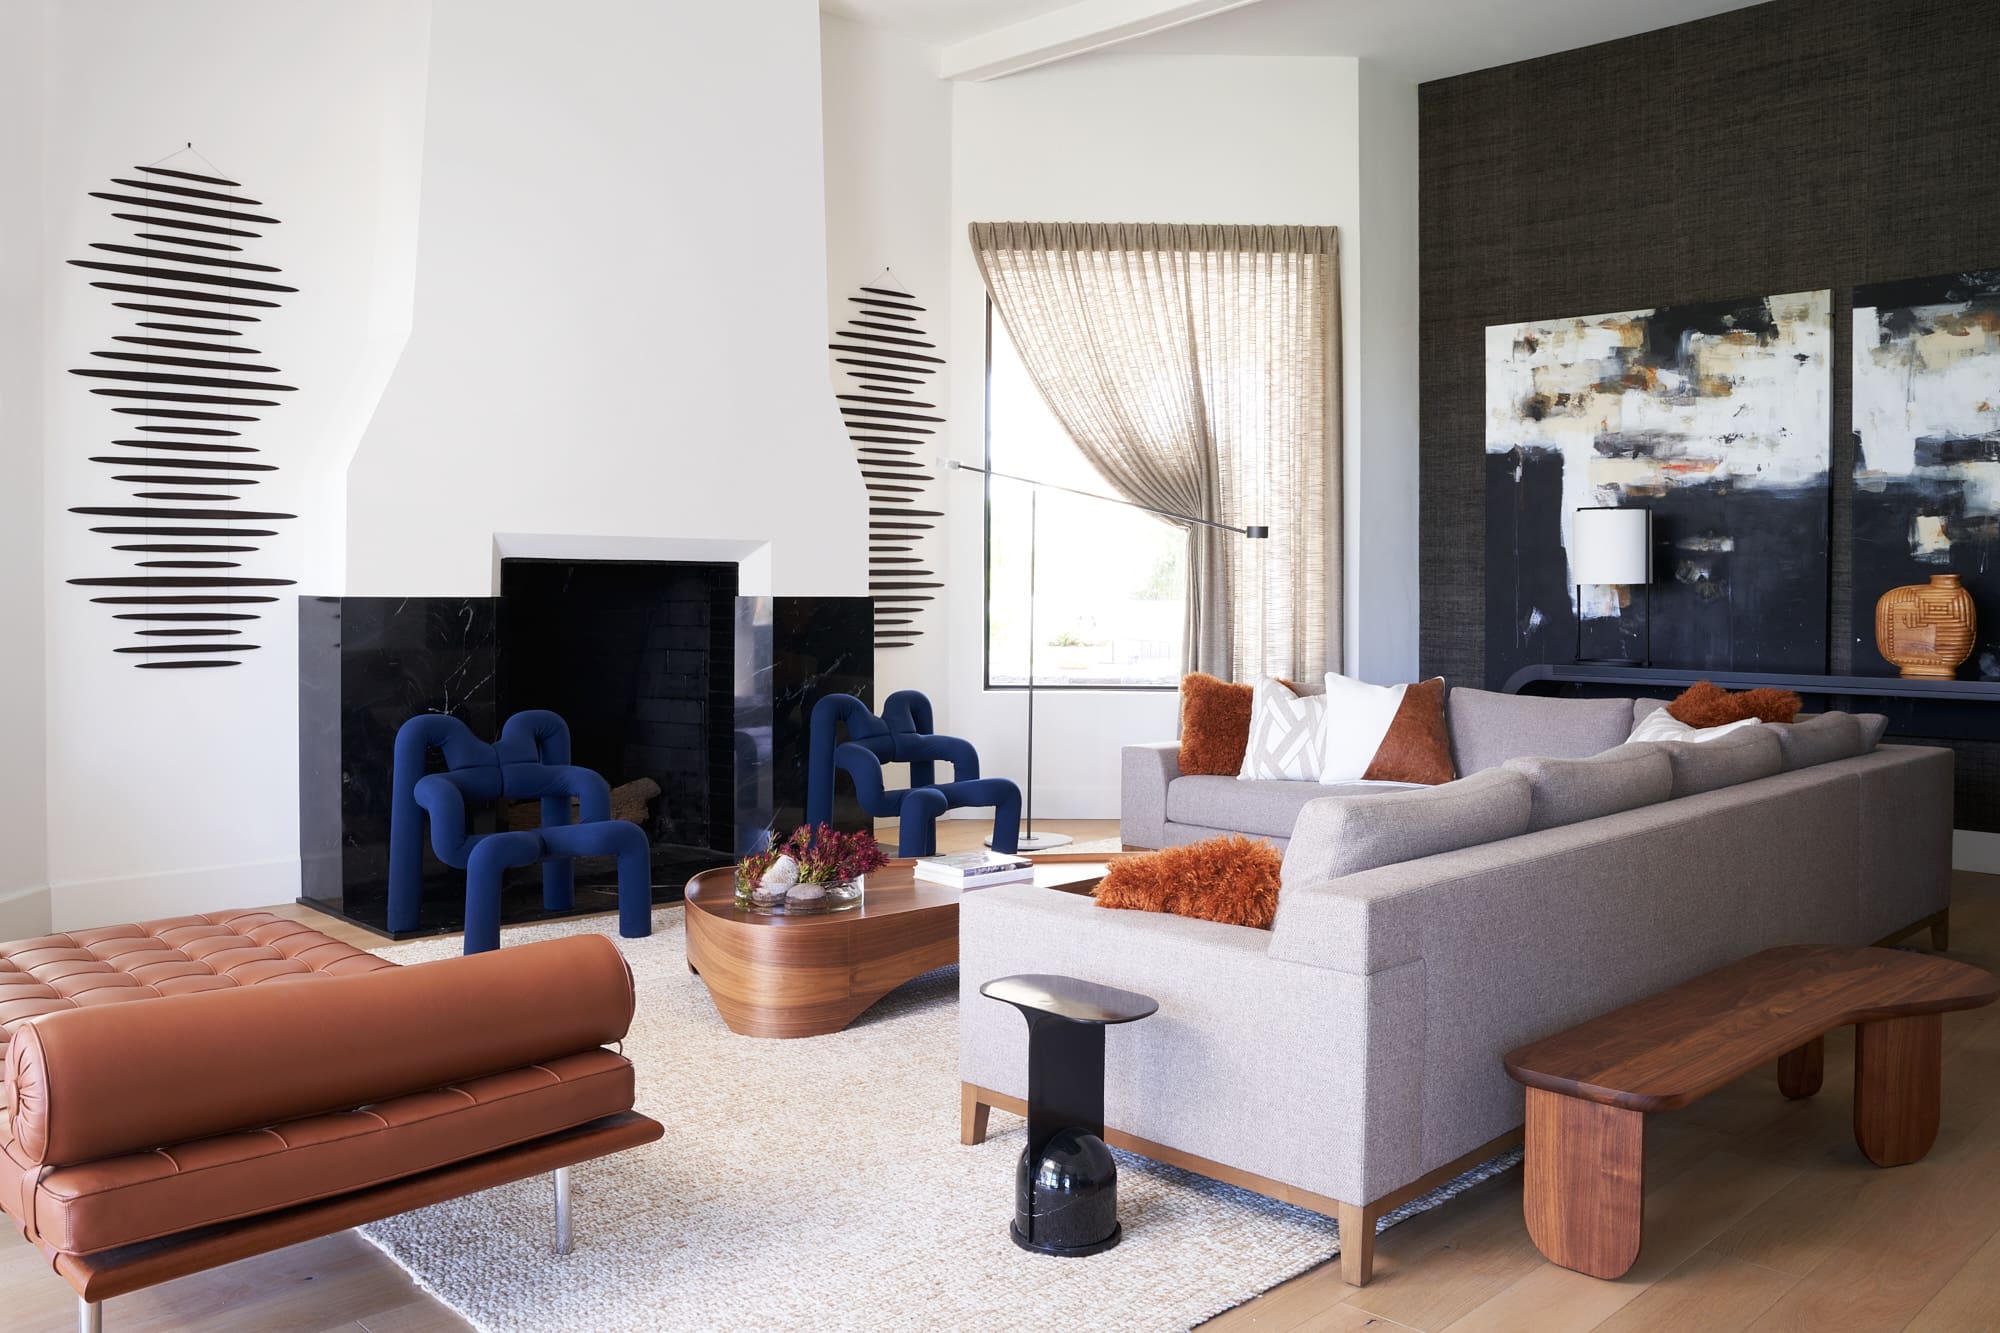 A living room with a fireplace, couches, night stand, decorative wall elements, and painting.